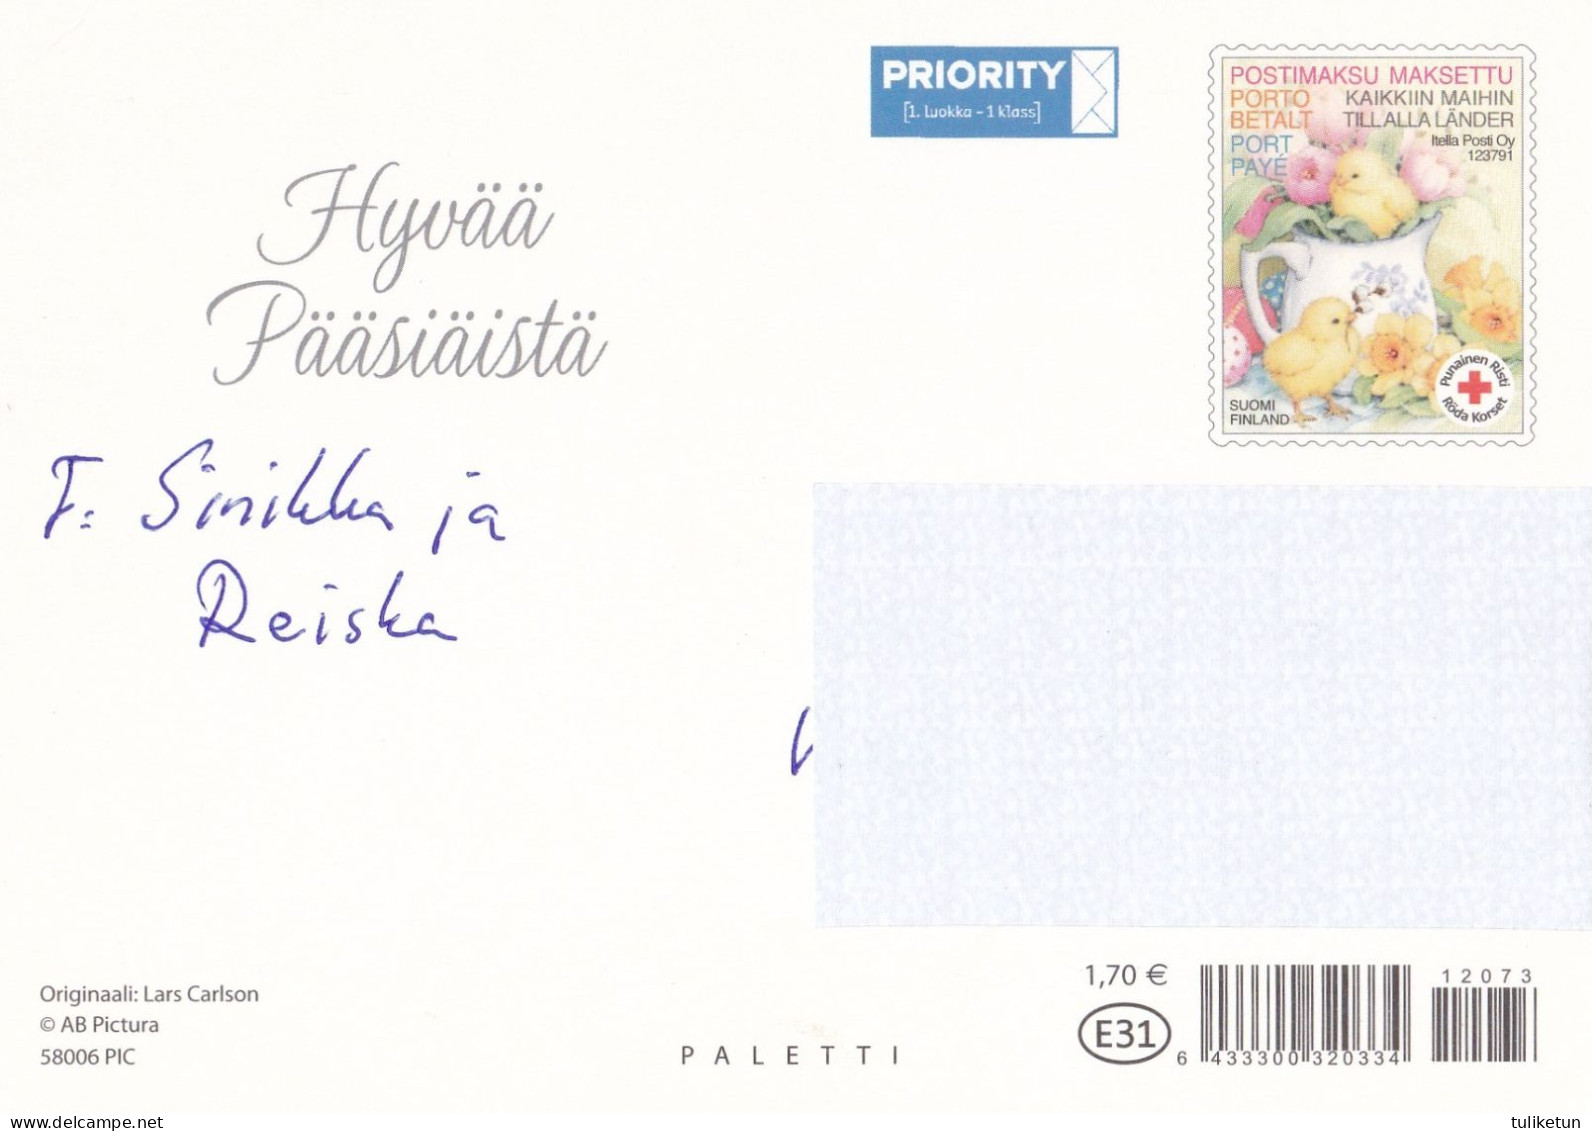 Postal Stationery - Chicks With Egg - Happy Easter - Red Cross - Suomi Finland - Postage Paid - Lars Carlsson - Postal Stationery